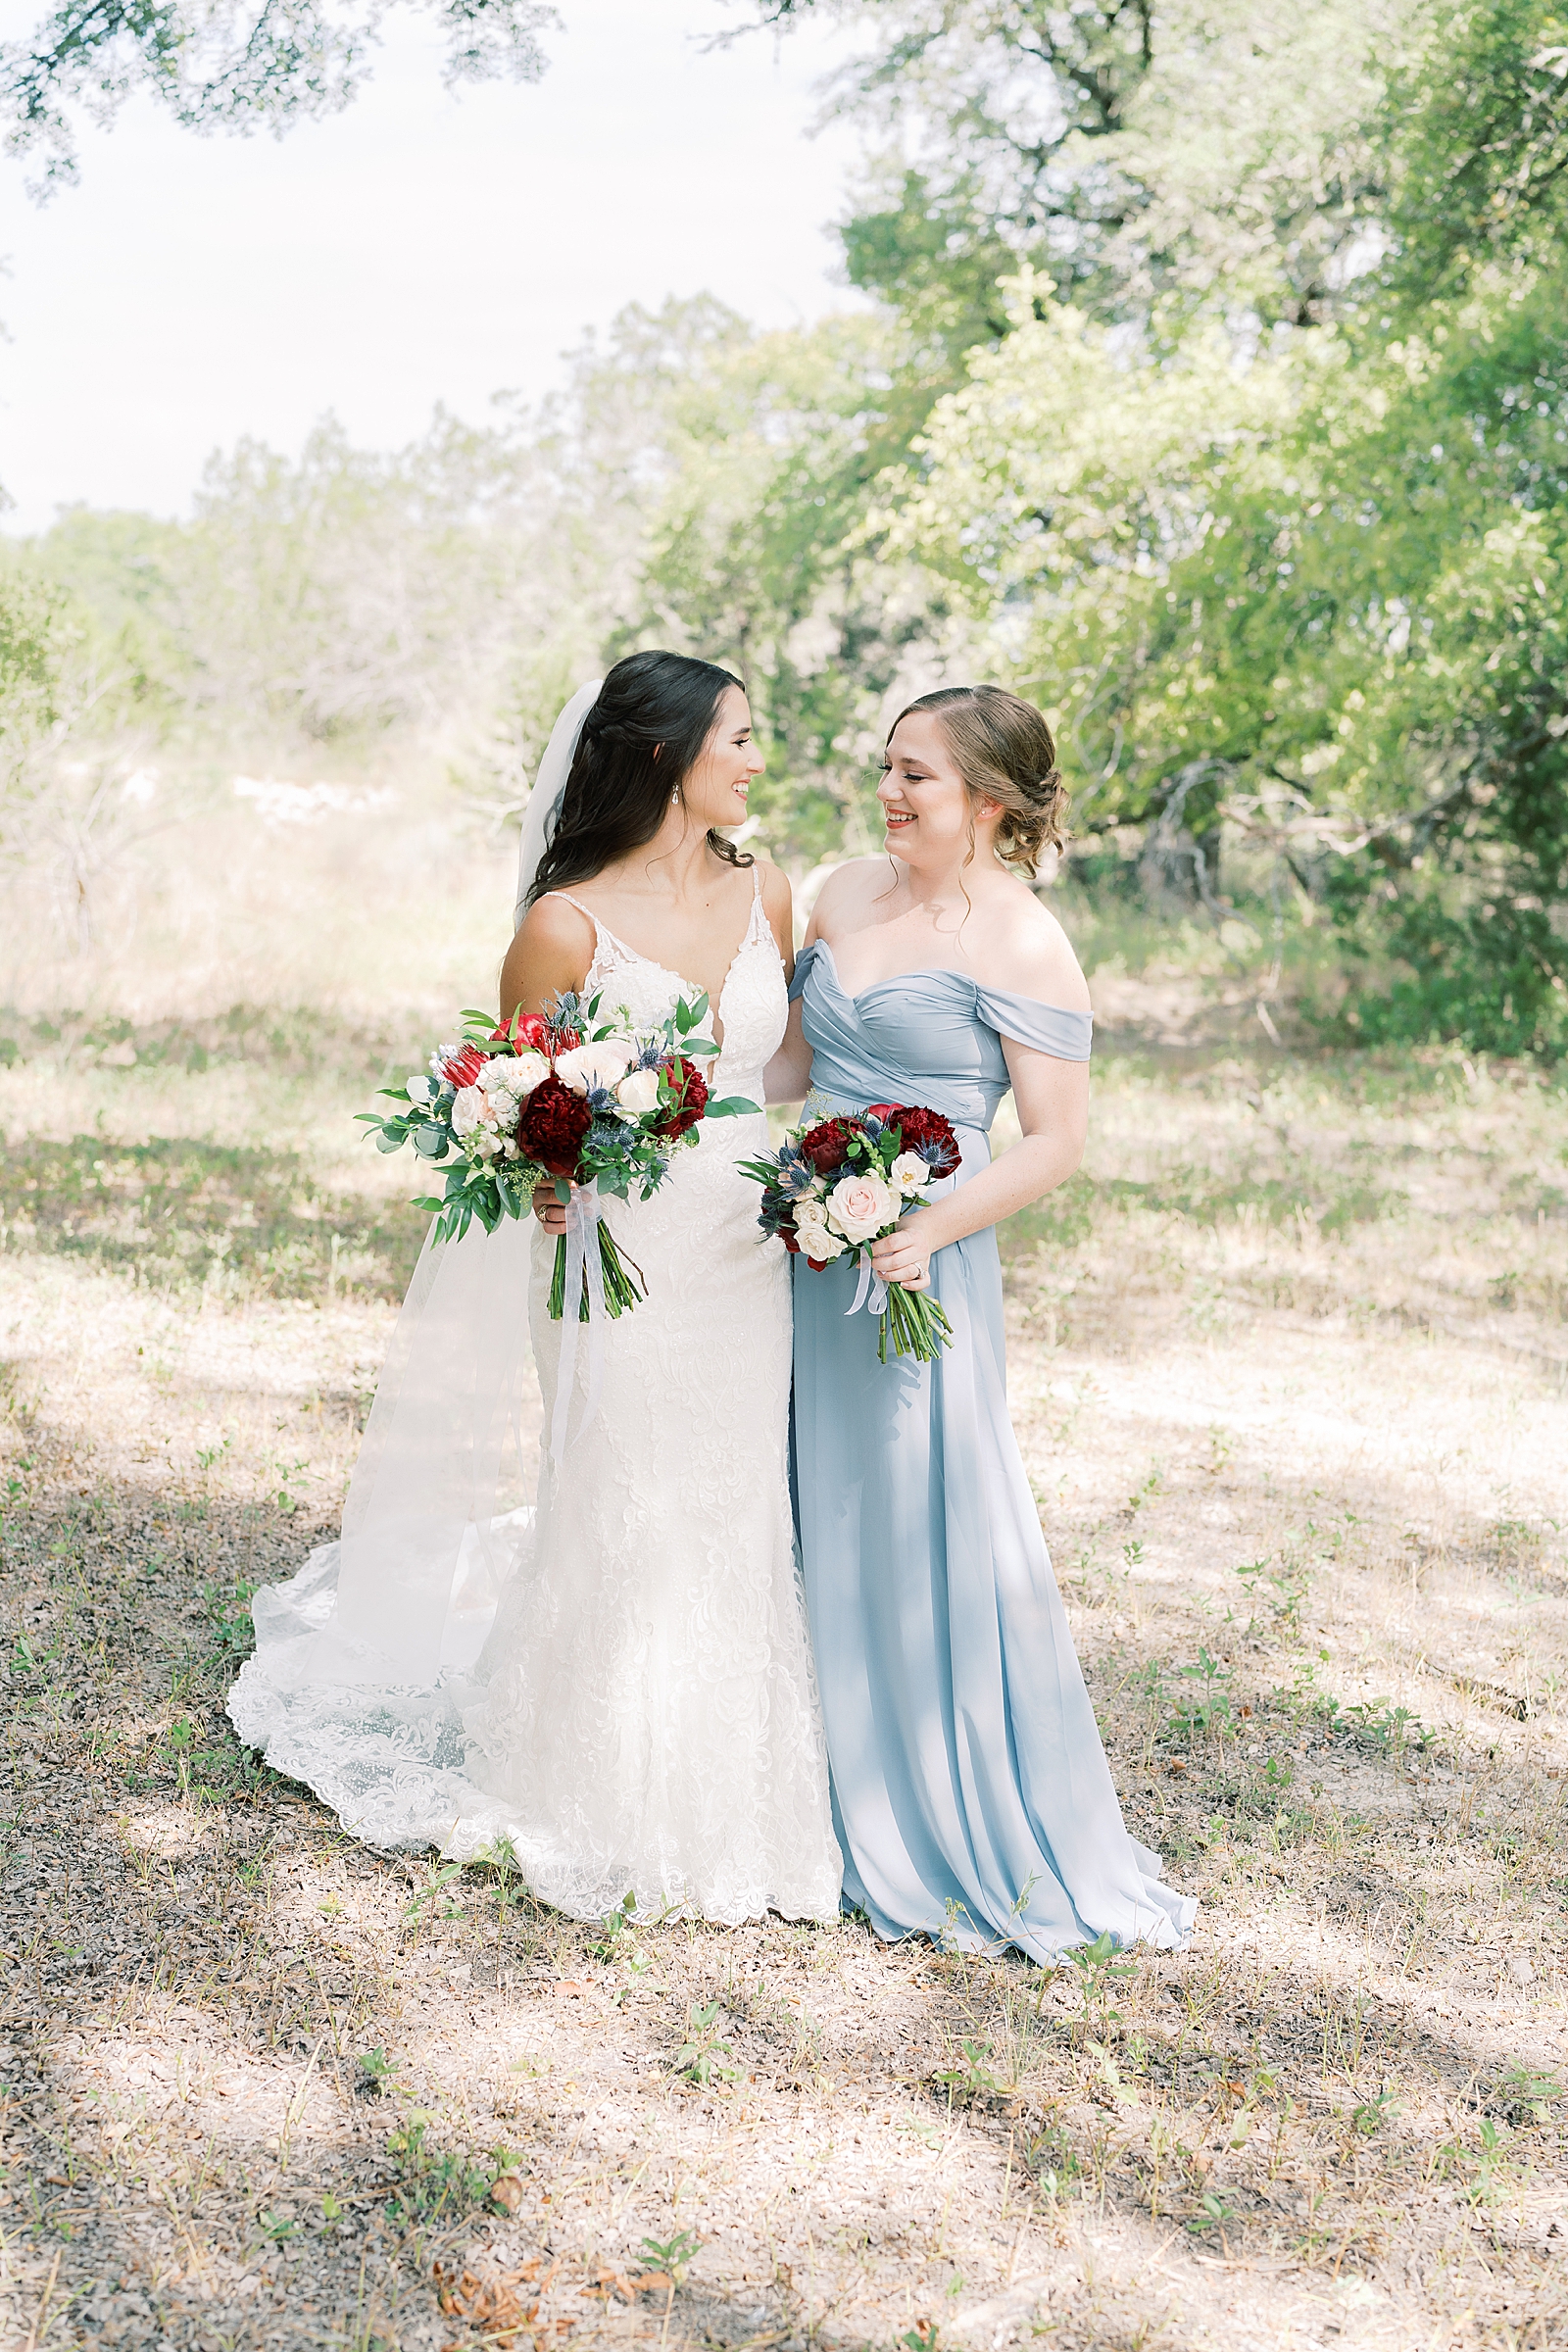 This navy, light gray, with pops of burgundy wedding day is some serious color palette inspo! In Dripping Springs, Texas at Saddle Creek Weddings, this day was full of elegance, fun and thoughtful details. Click through to see all the pretty! #weddingdayinspiration #dustybluewedding #dustybluebridesmaiddress #maidofhonor